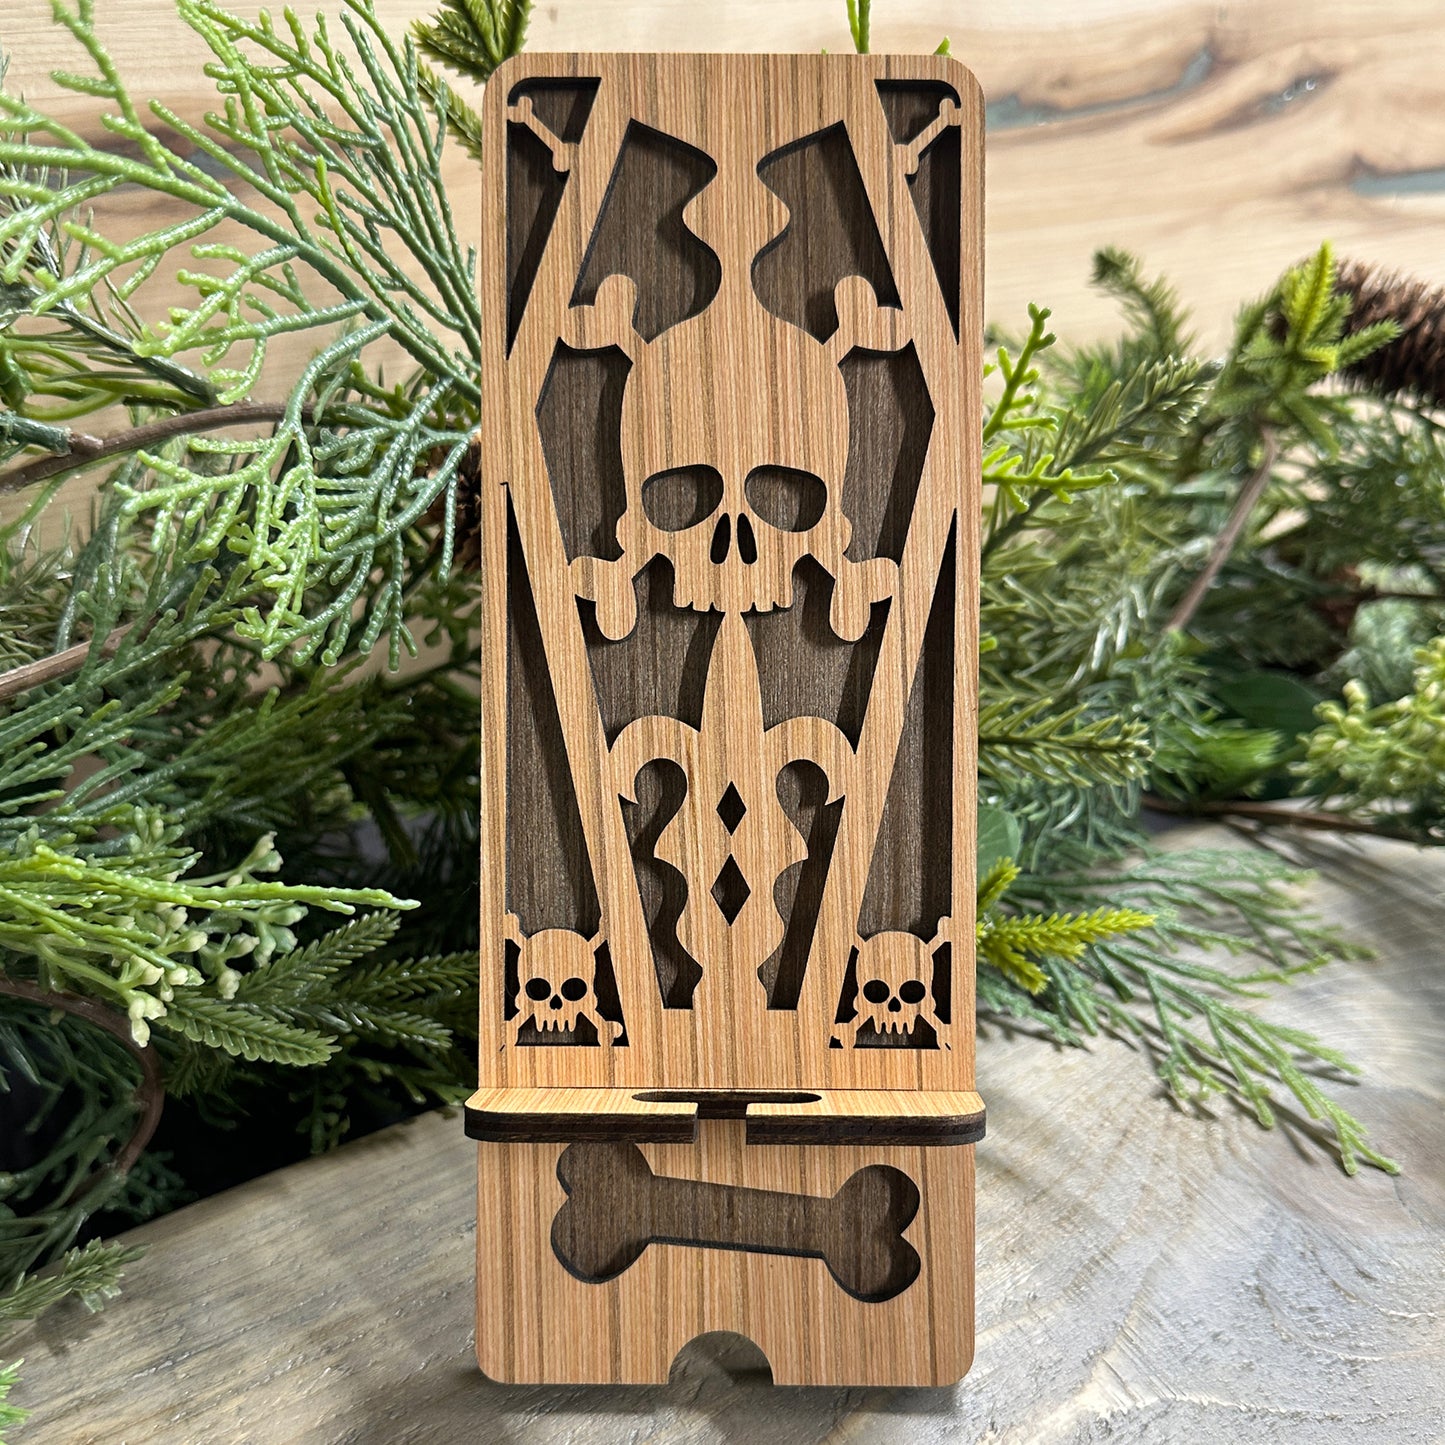 Wood Phone Stand and Decor - Skull, Crossbones and Casket Design